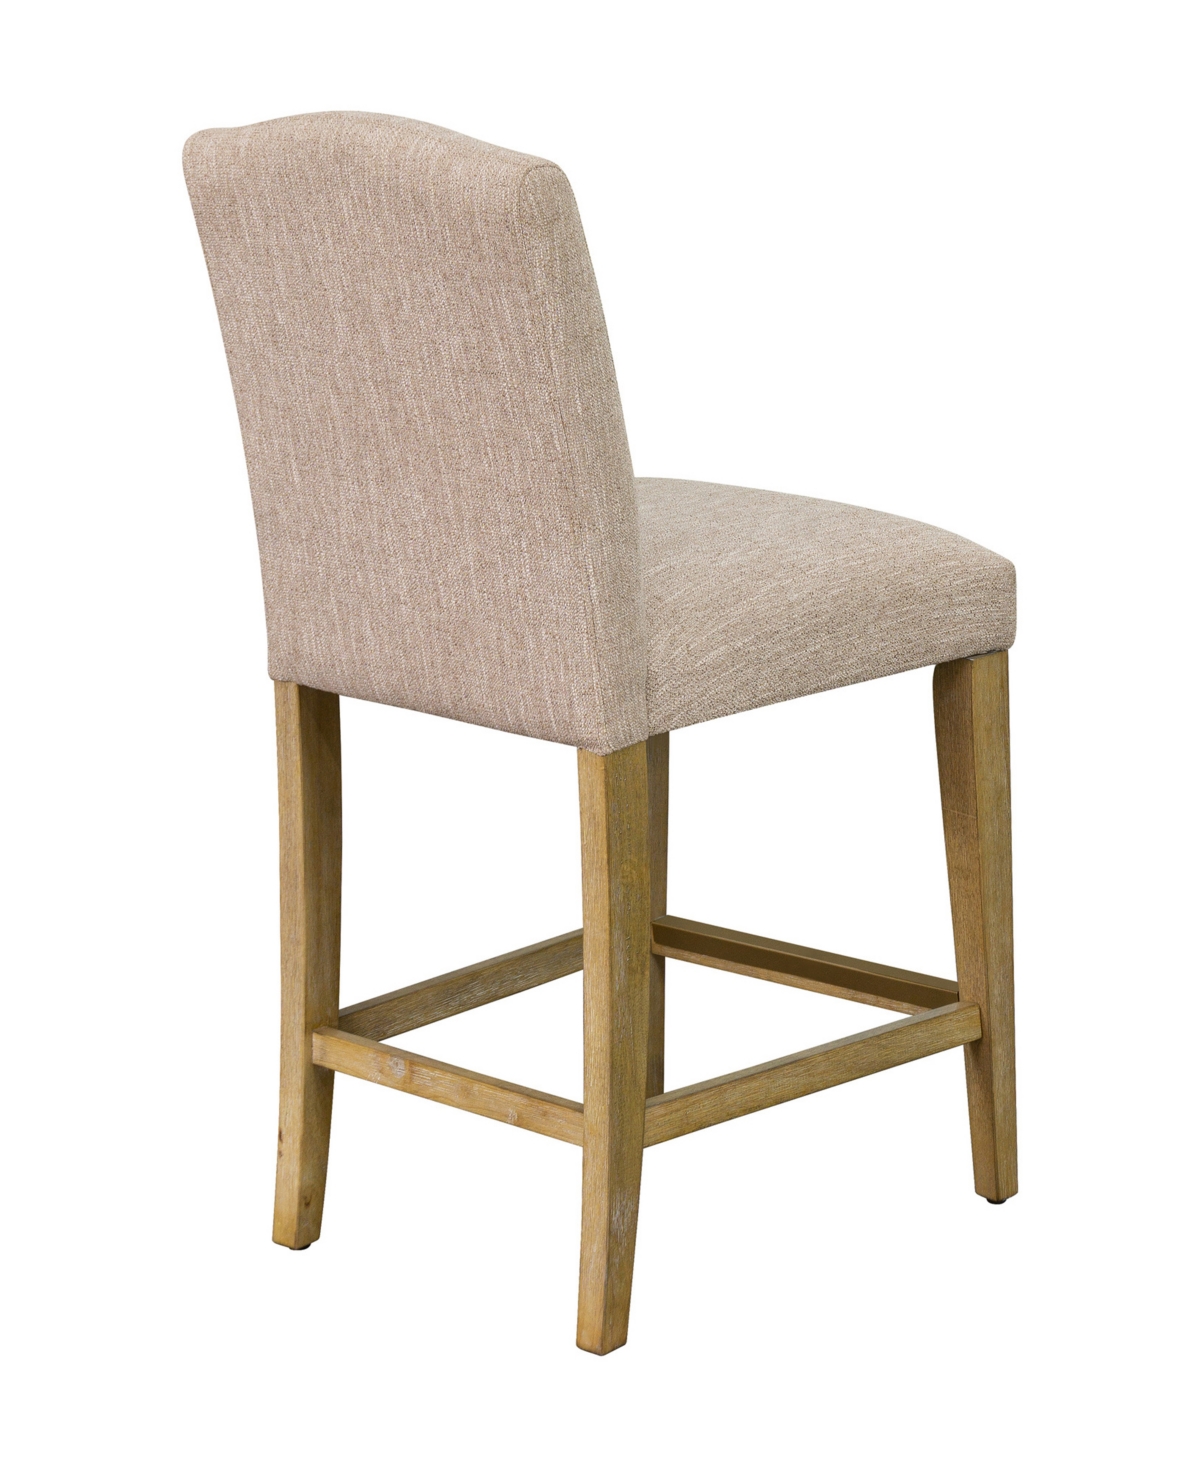 Shop Martha Stewart Collection Martha Stewart Connor 25" High Fabric Upholstered Counter Stool In Tan